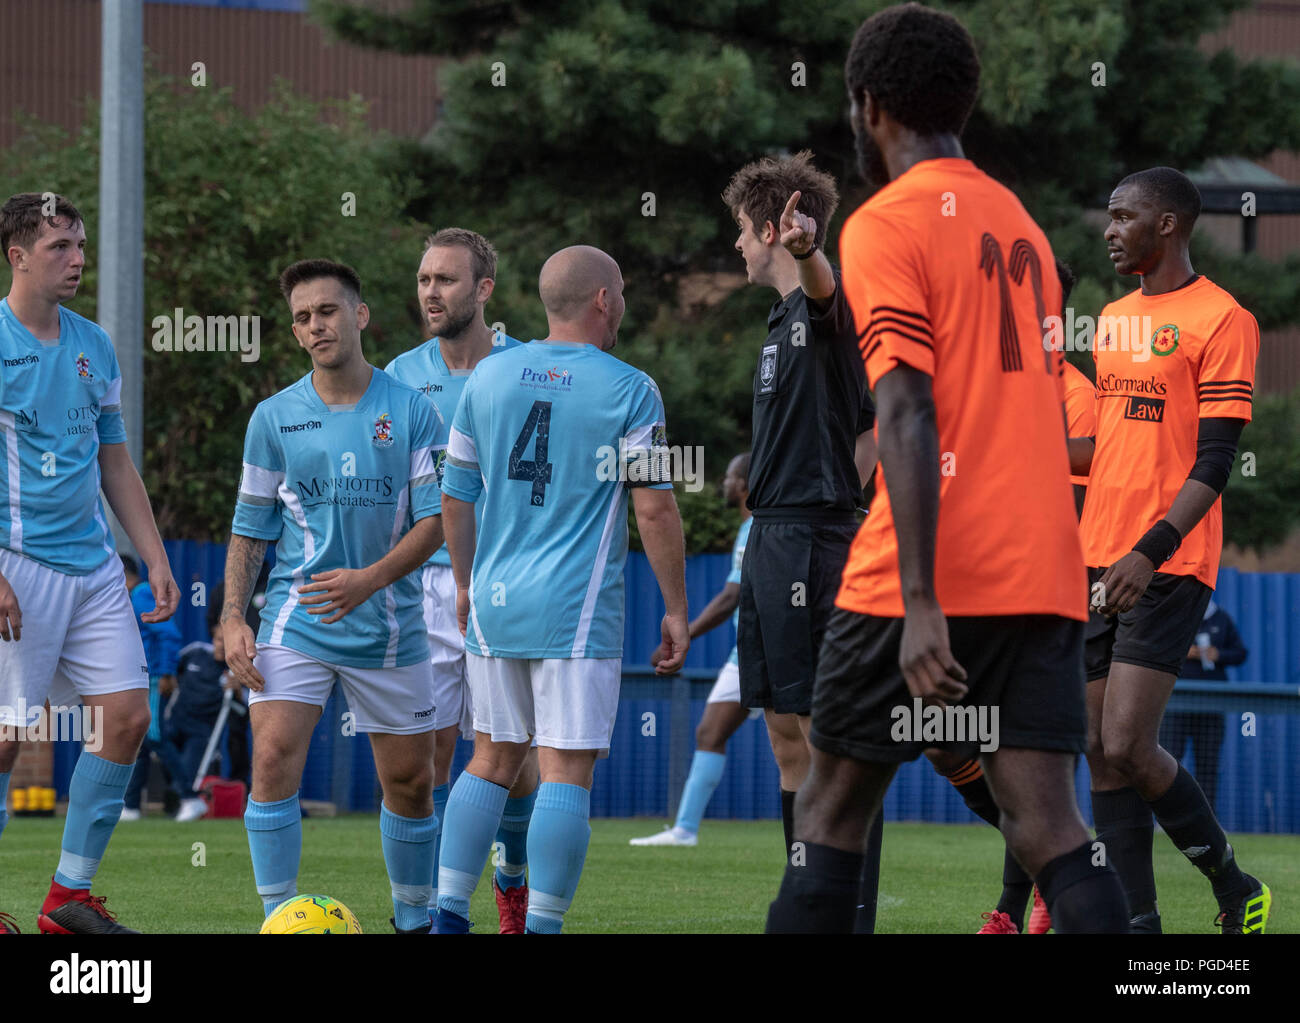 Brentwood, UK 25th August 2018 Football match; Brentwood Town FC (1) Vs Sporting Bengal United (1) at the Brentwood Town Arena in an FA Cup tie match. The Sporting Bengal set-up is unusual in that it is operated by the Bangladesh Football Association (UK) and players are selected from (and retain their affiliation with) the Sunday league clubs which are affiliated to that organisation, Sporting Bengal United FC was therefore established in 1996 to challenge the under-representation of Asians in football. Credit: Ian Davidson/Alamy Live News Stock Photo